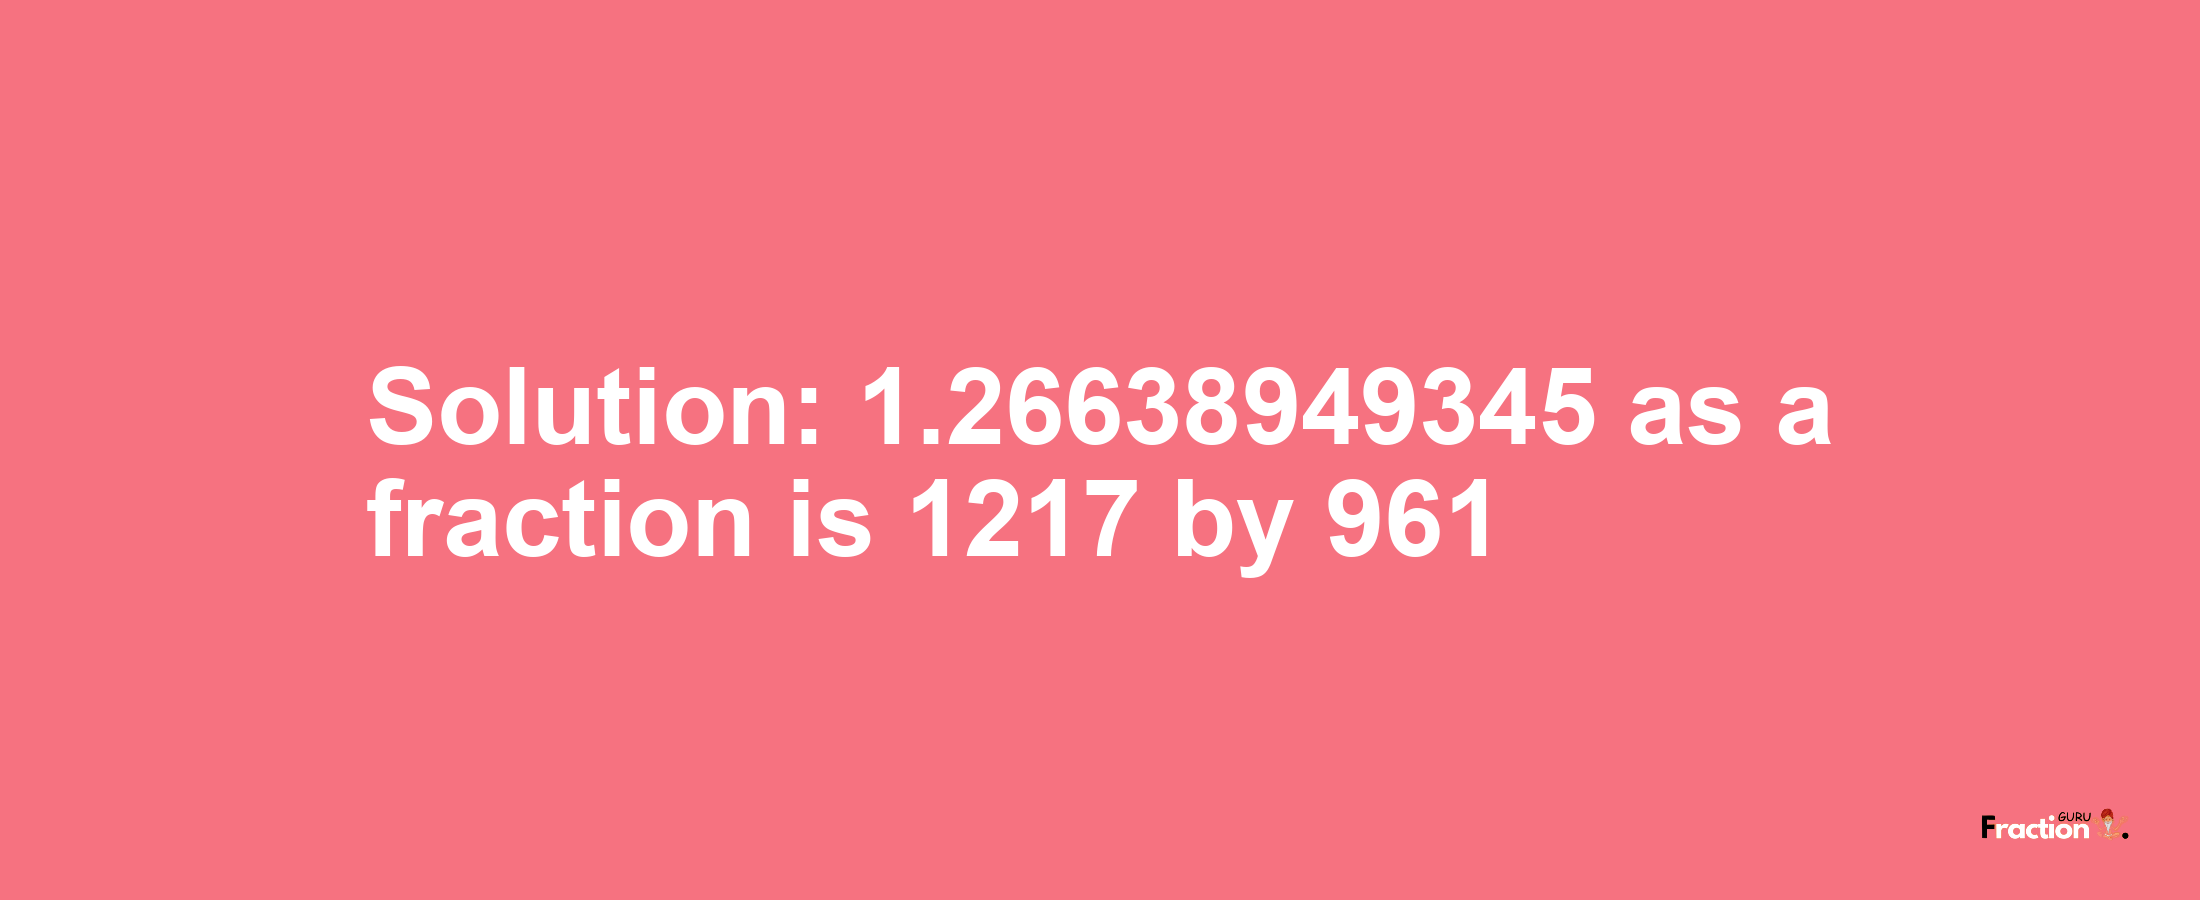 Solution:1.26638949345 as a fraction is 1217/961